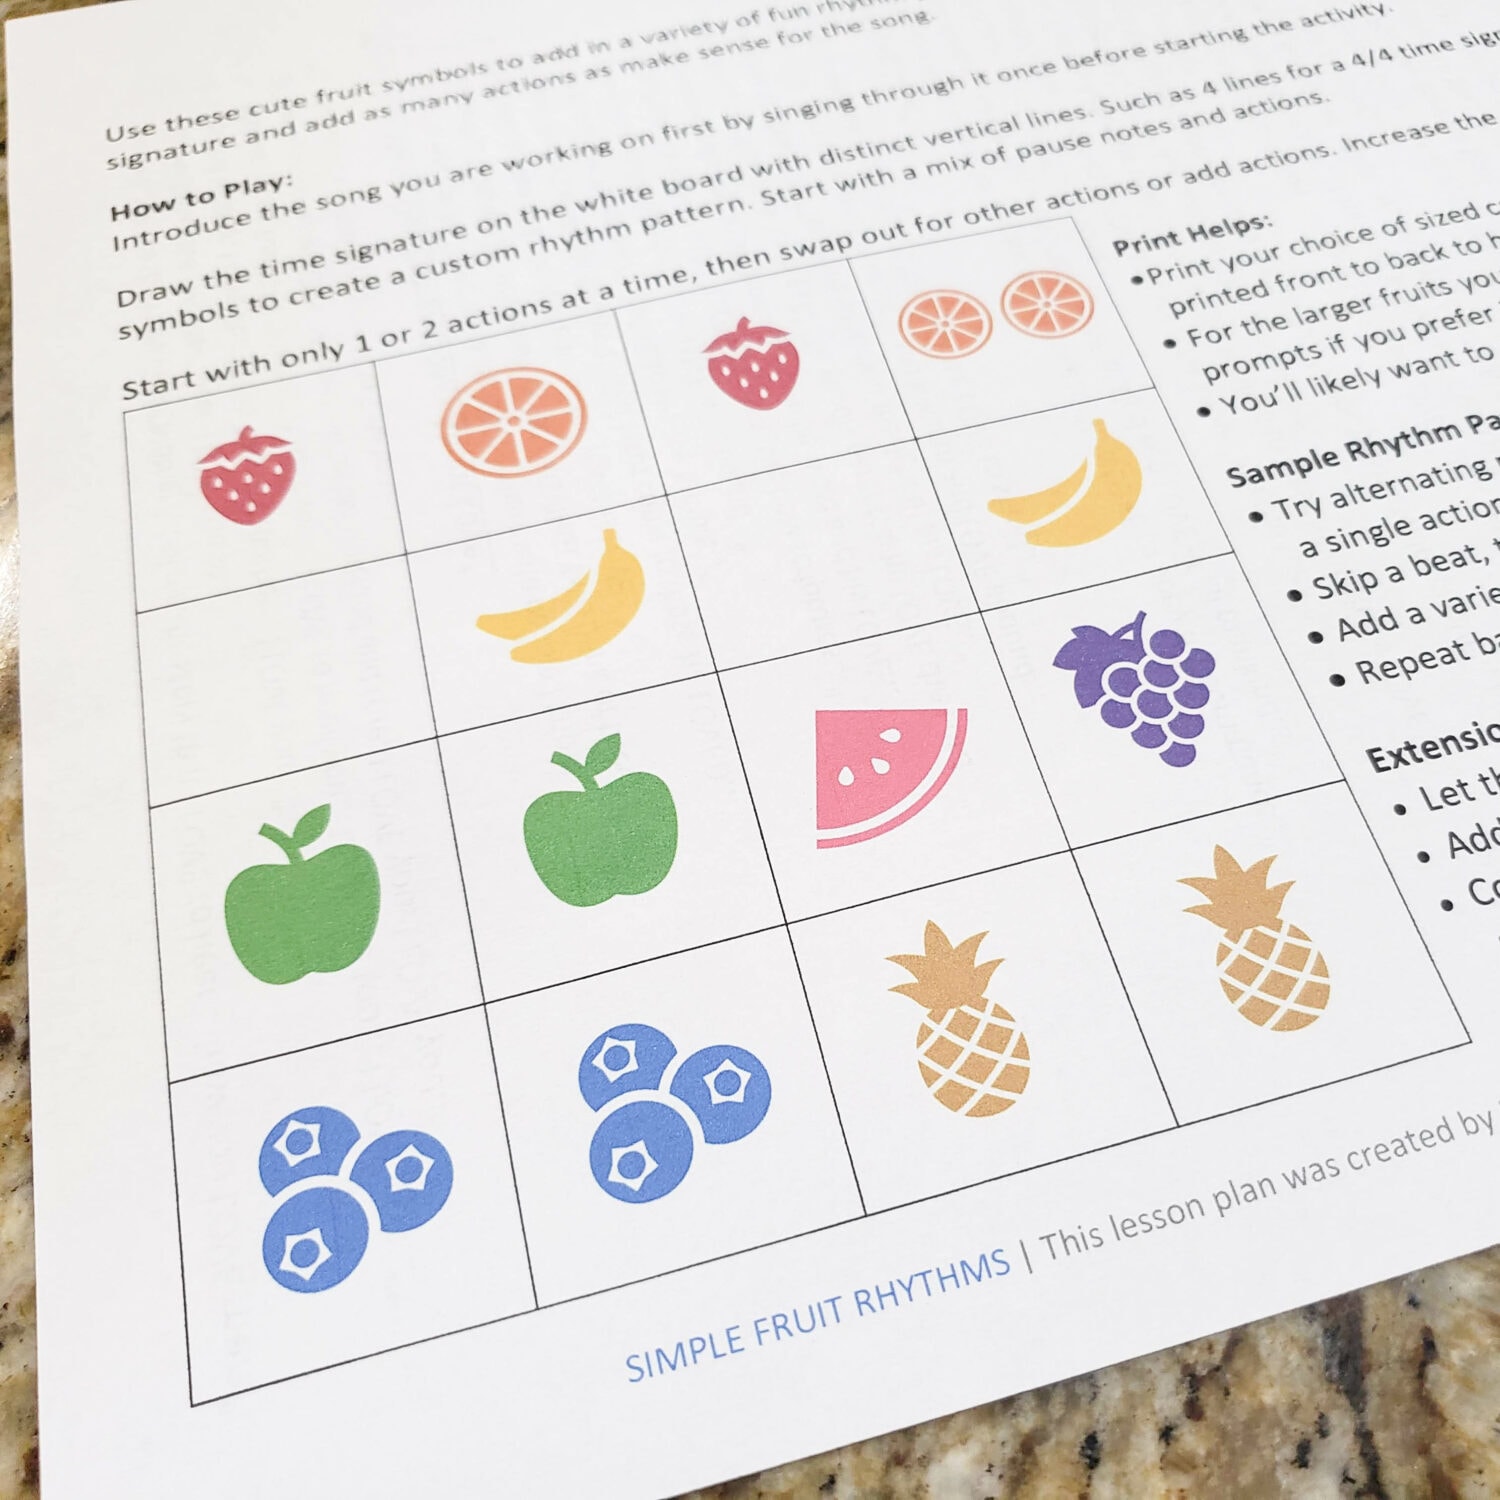 Play a fun game of Fruit Ninja in singing time with these flexible Fruit Rhythm Patterns printable cards that match with an action, color, and even a shape to use with any Primary song. Great for any music leaders. LDS Review Game.